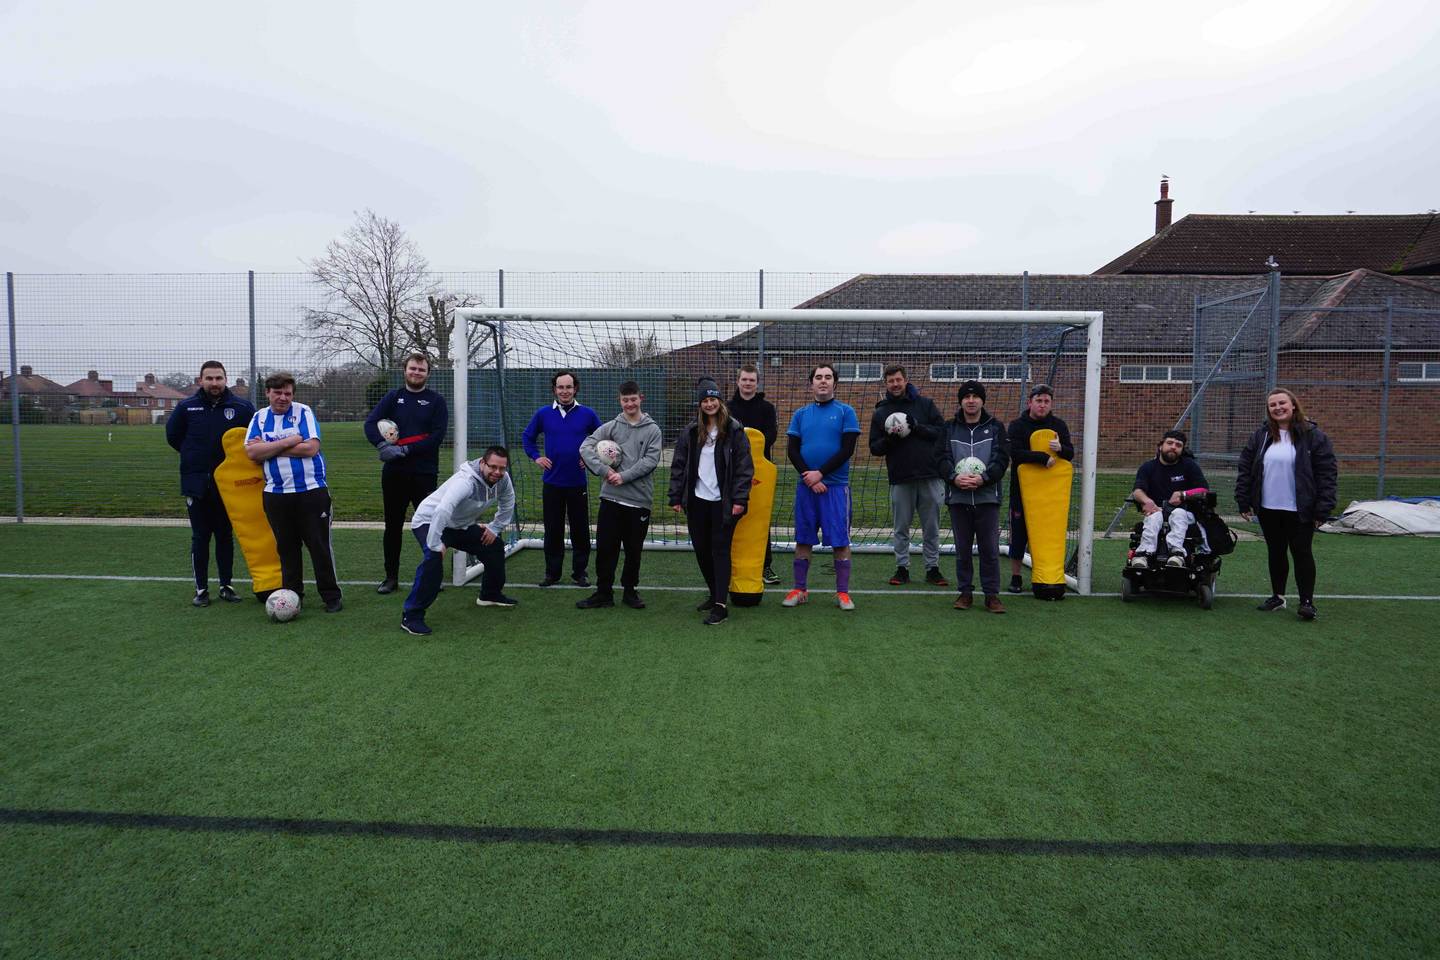 Group shot of Sport for Confidence and Colchester United FC on football field smiling to camera. 